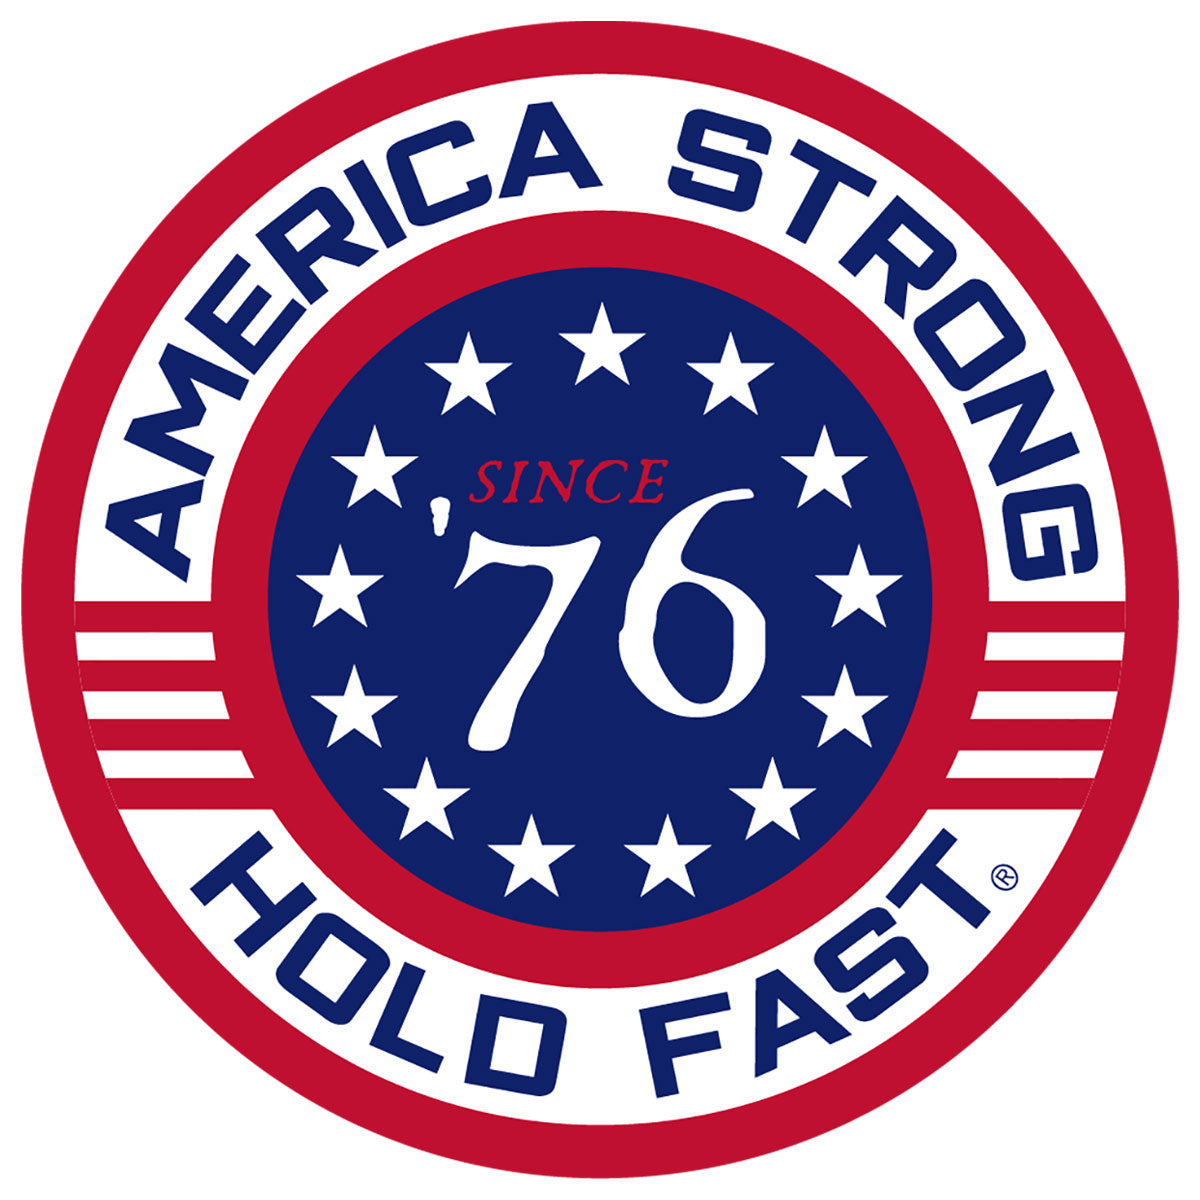 HOLD FAST Sticker America Strong